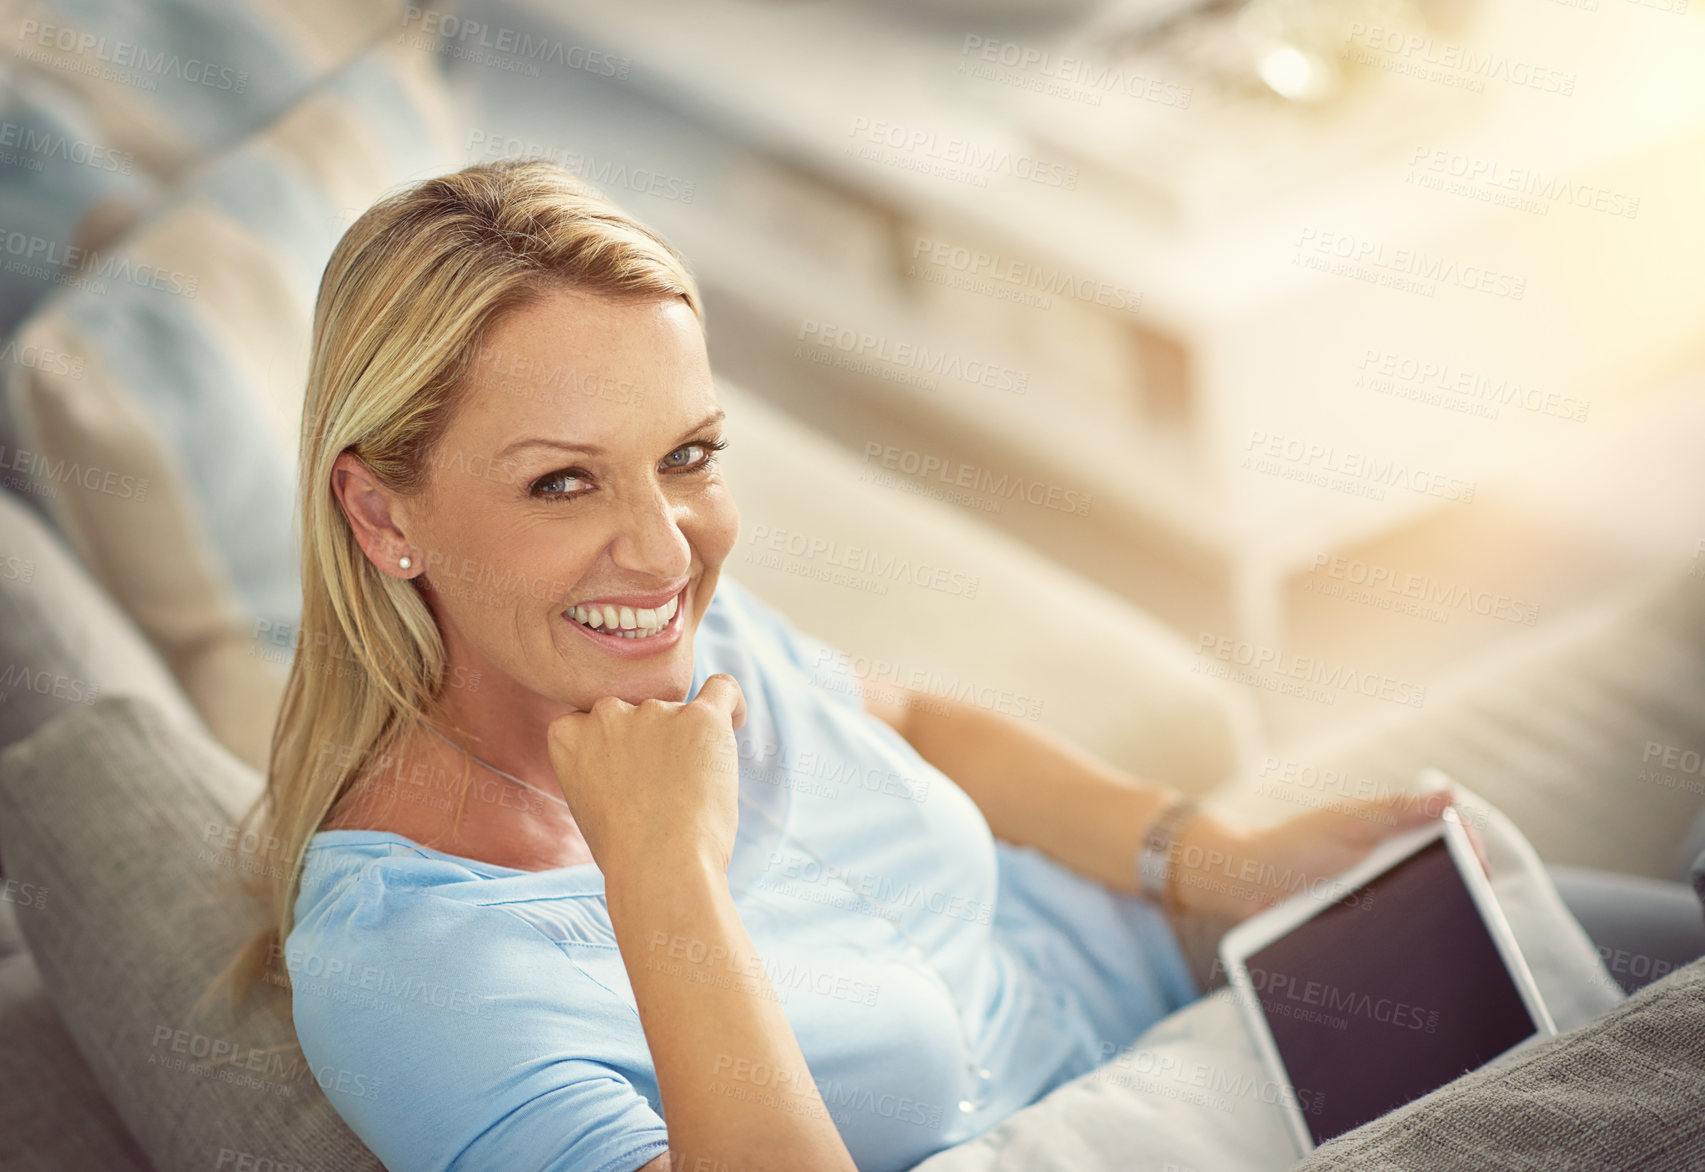 Buy stock photo Shot of a mature woman relaxing on the sofa with a digital tablet